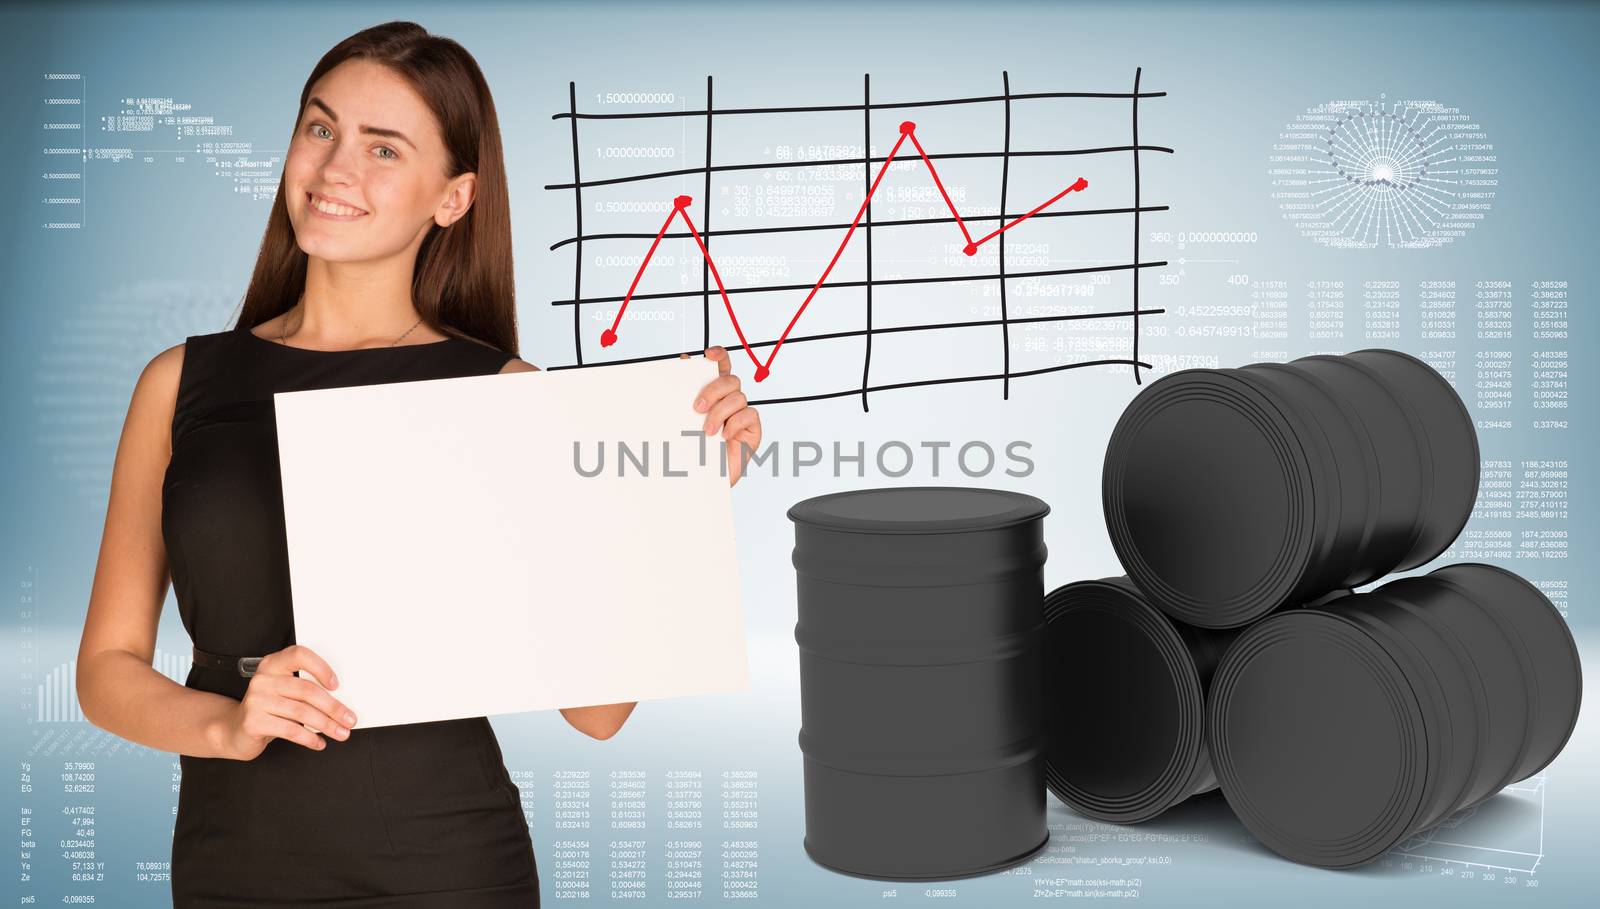 Businesswoman hold paper sheet. Black oil barrels are located next. Graph as backdrop